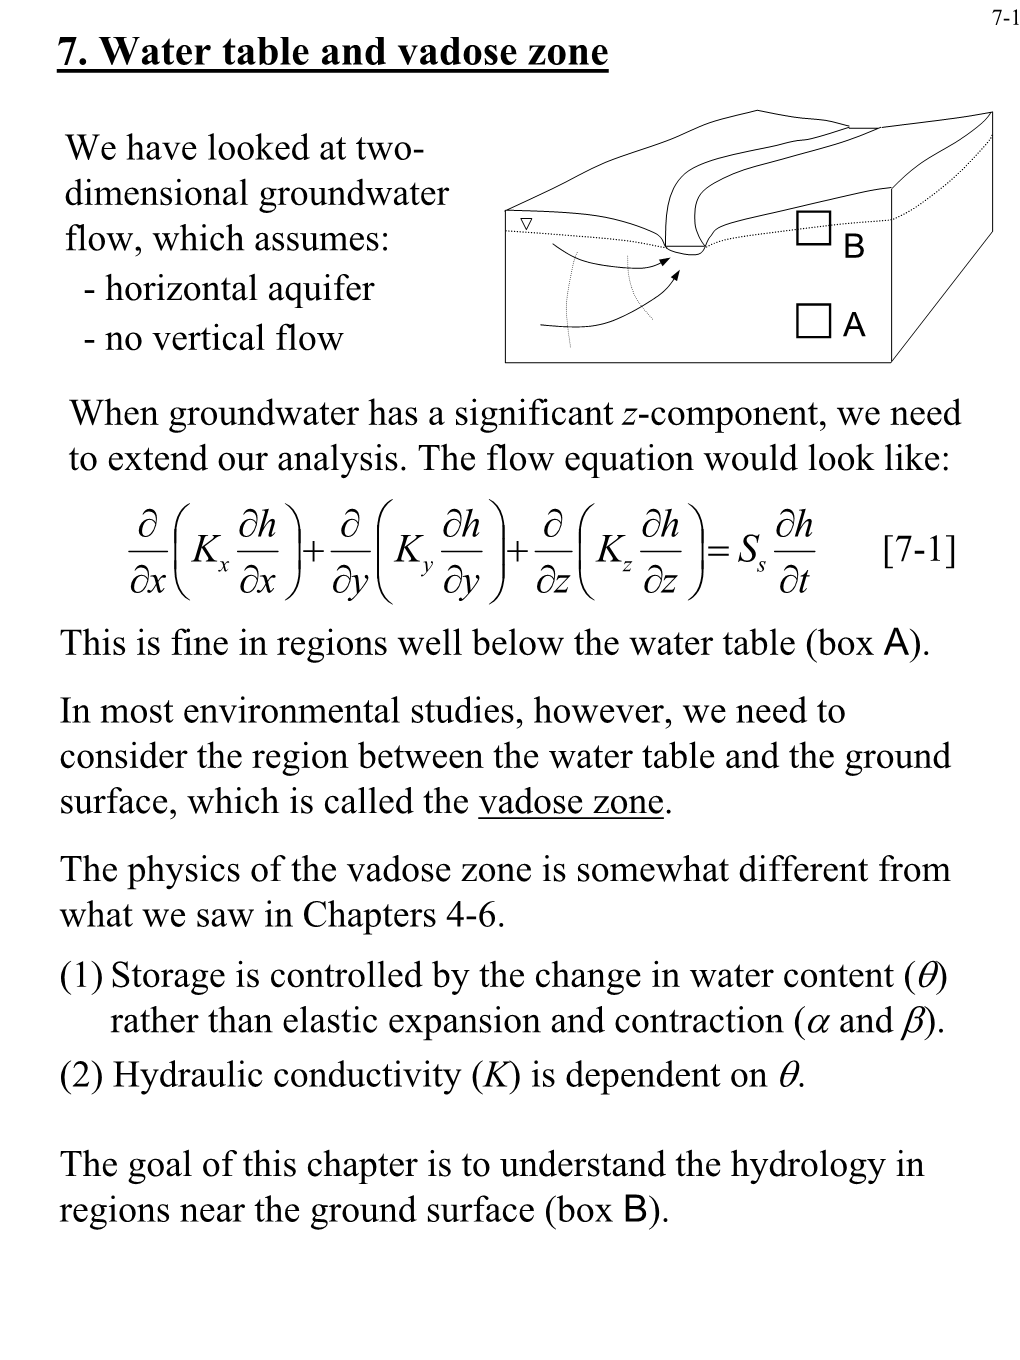 Lecture 7: Water Table and Vadose Zone